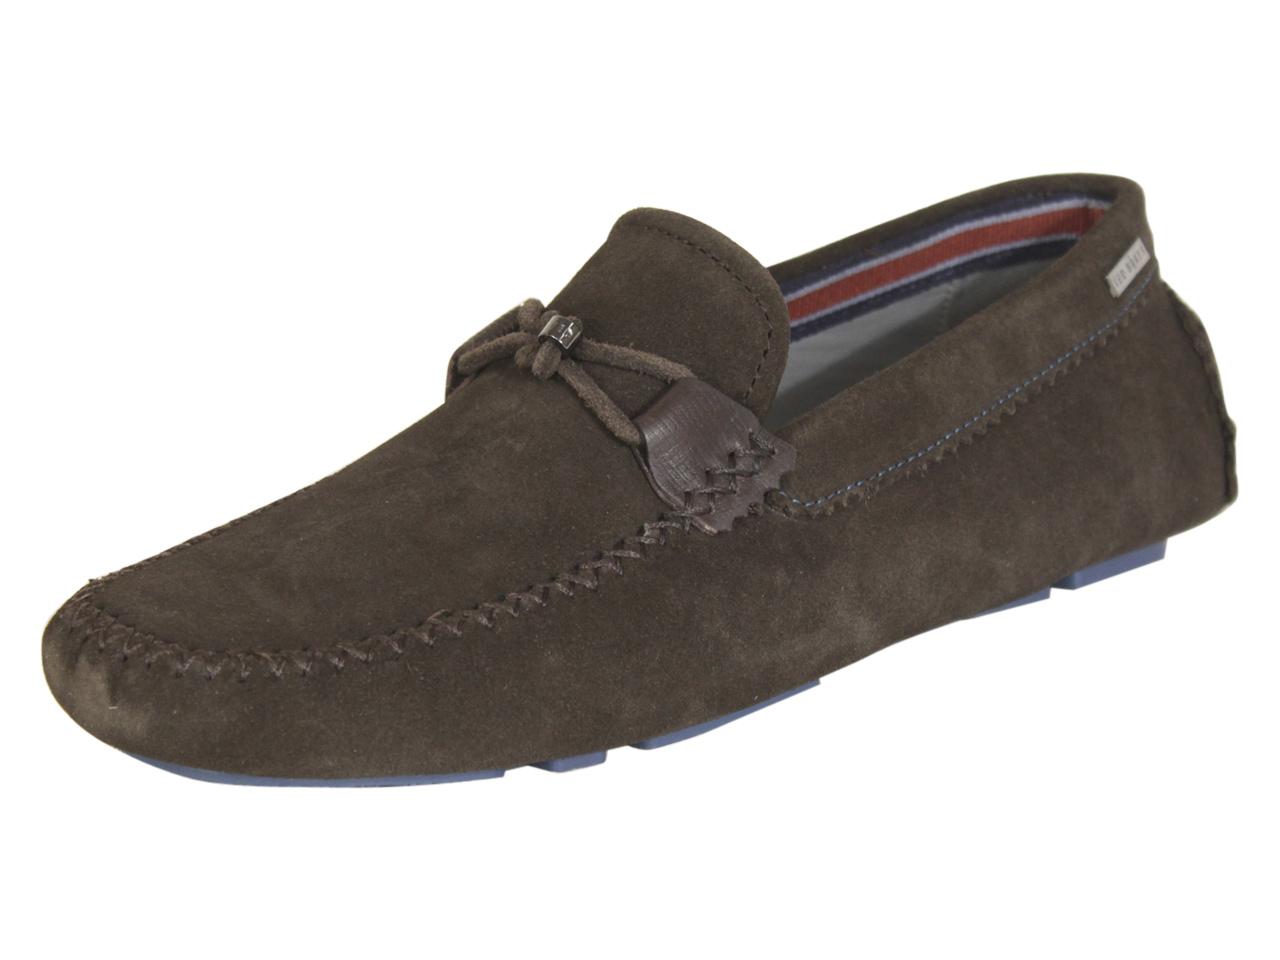 eeuw Reductor Onderdompeling Ted Baker Men's Catens Driving Moccasins Loafers Shoes | JoyLot.com